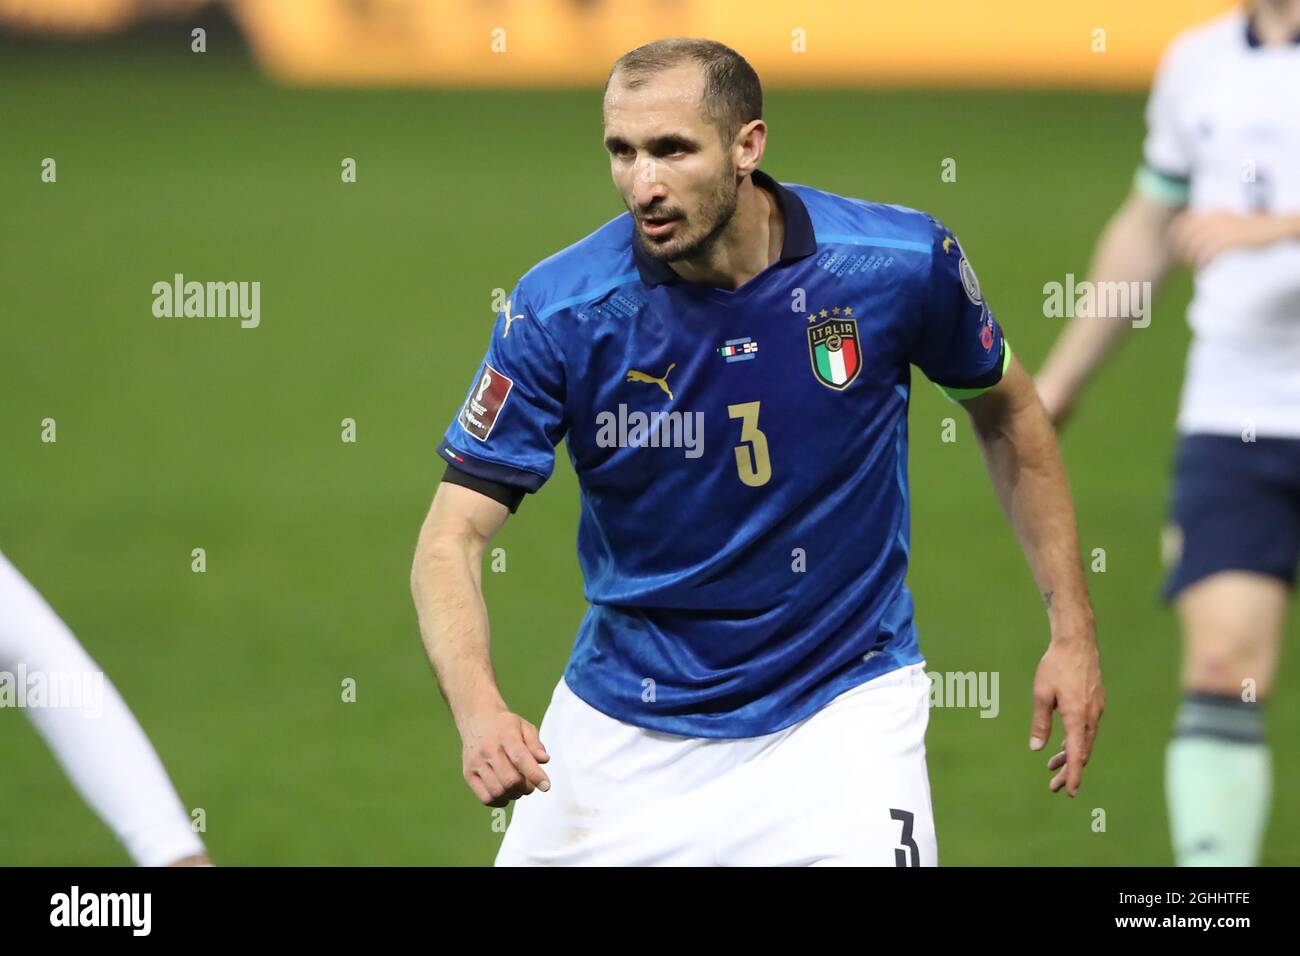 Giorgio Chiellini of Italy during the Fifa World Cup qualifiers match at Stadio Ennio Tardini, Parma. Picture date: 25th March 2021. Picture credit should read: Jonathan Moscrop/Sportimage via PA Images Stock Photo